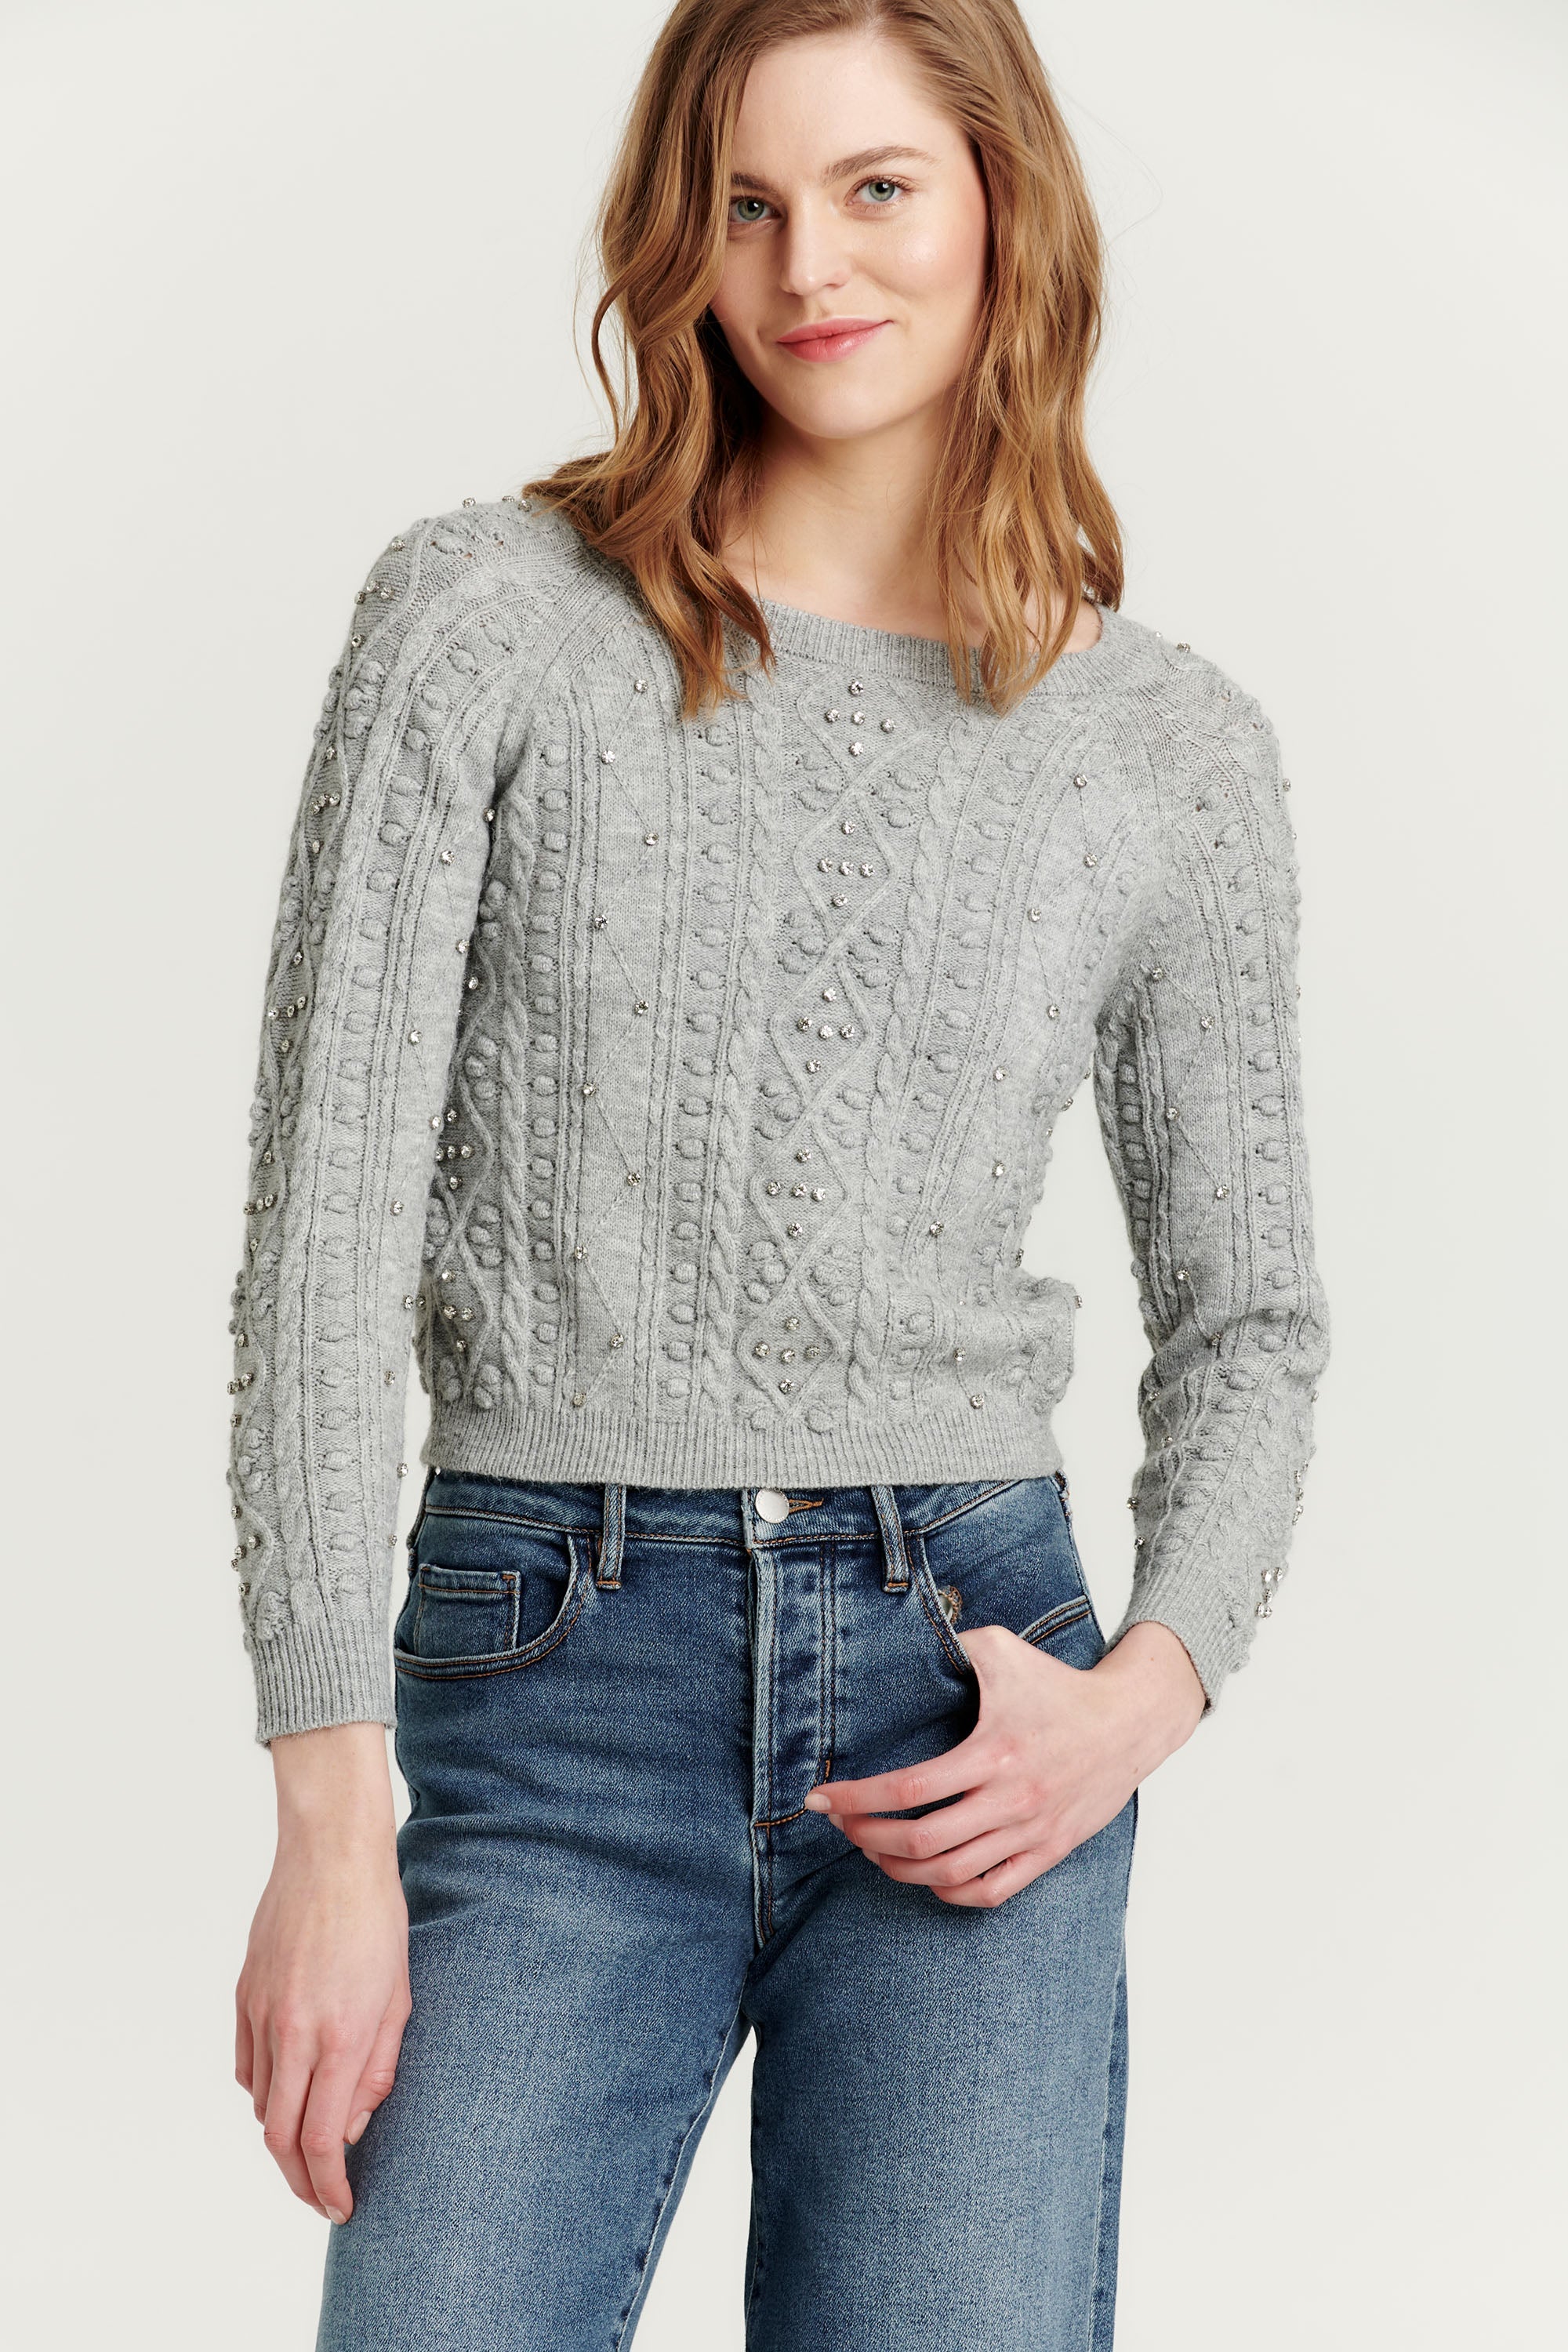 Sale, Save UpTo 60% on Jumpers & Sweaters